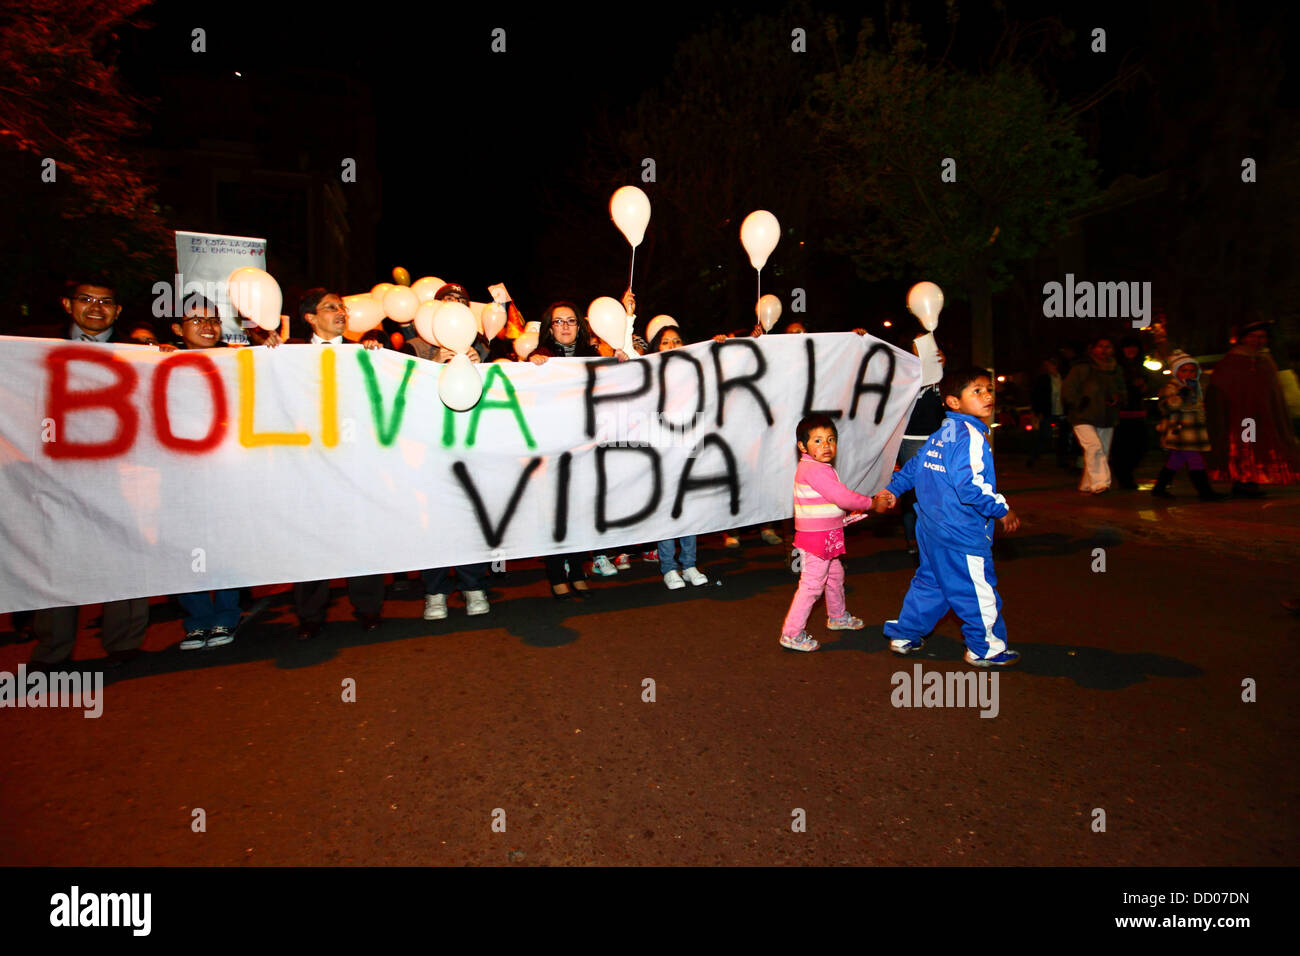 LA PAZ, BOLIVIA, 22nd August 2013. People take part in a march organised by the Red Pro-Vida (Pro Life Network) to protest against decriminalising abortion. Bolivia has been debating whether to decriminalise abortion since March 2012.  Credit:  James Brunker / Alamy Live News Stock Photo